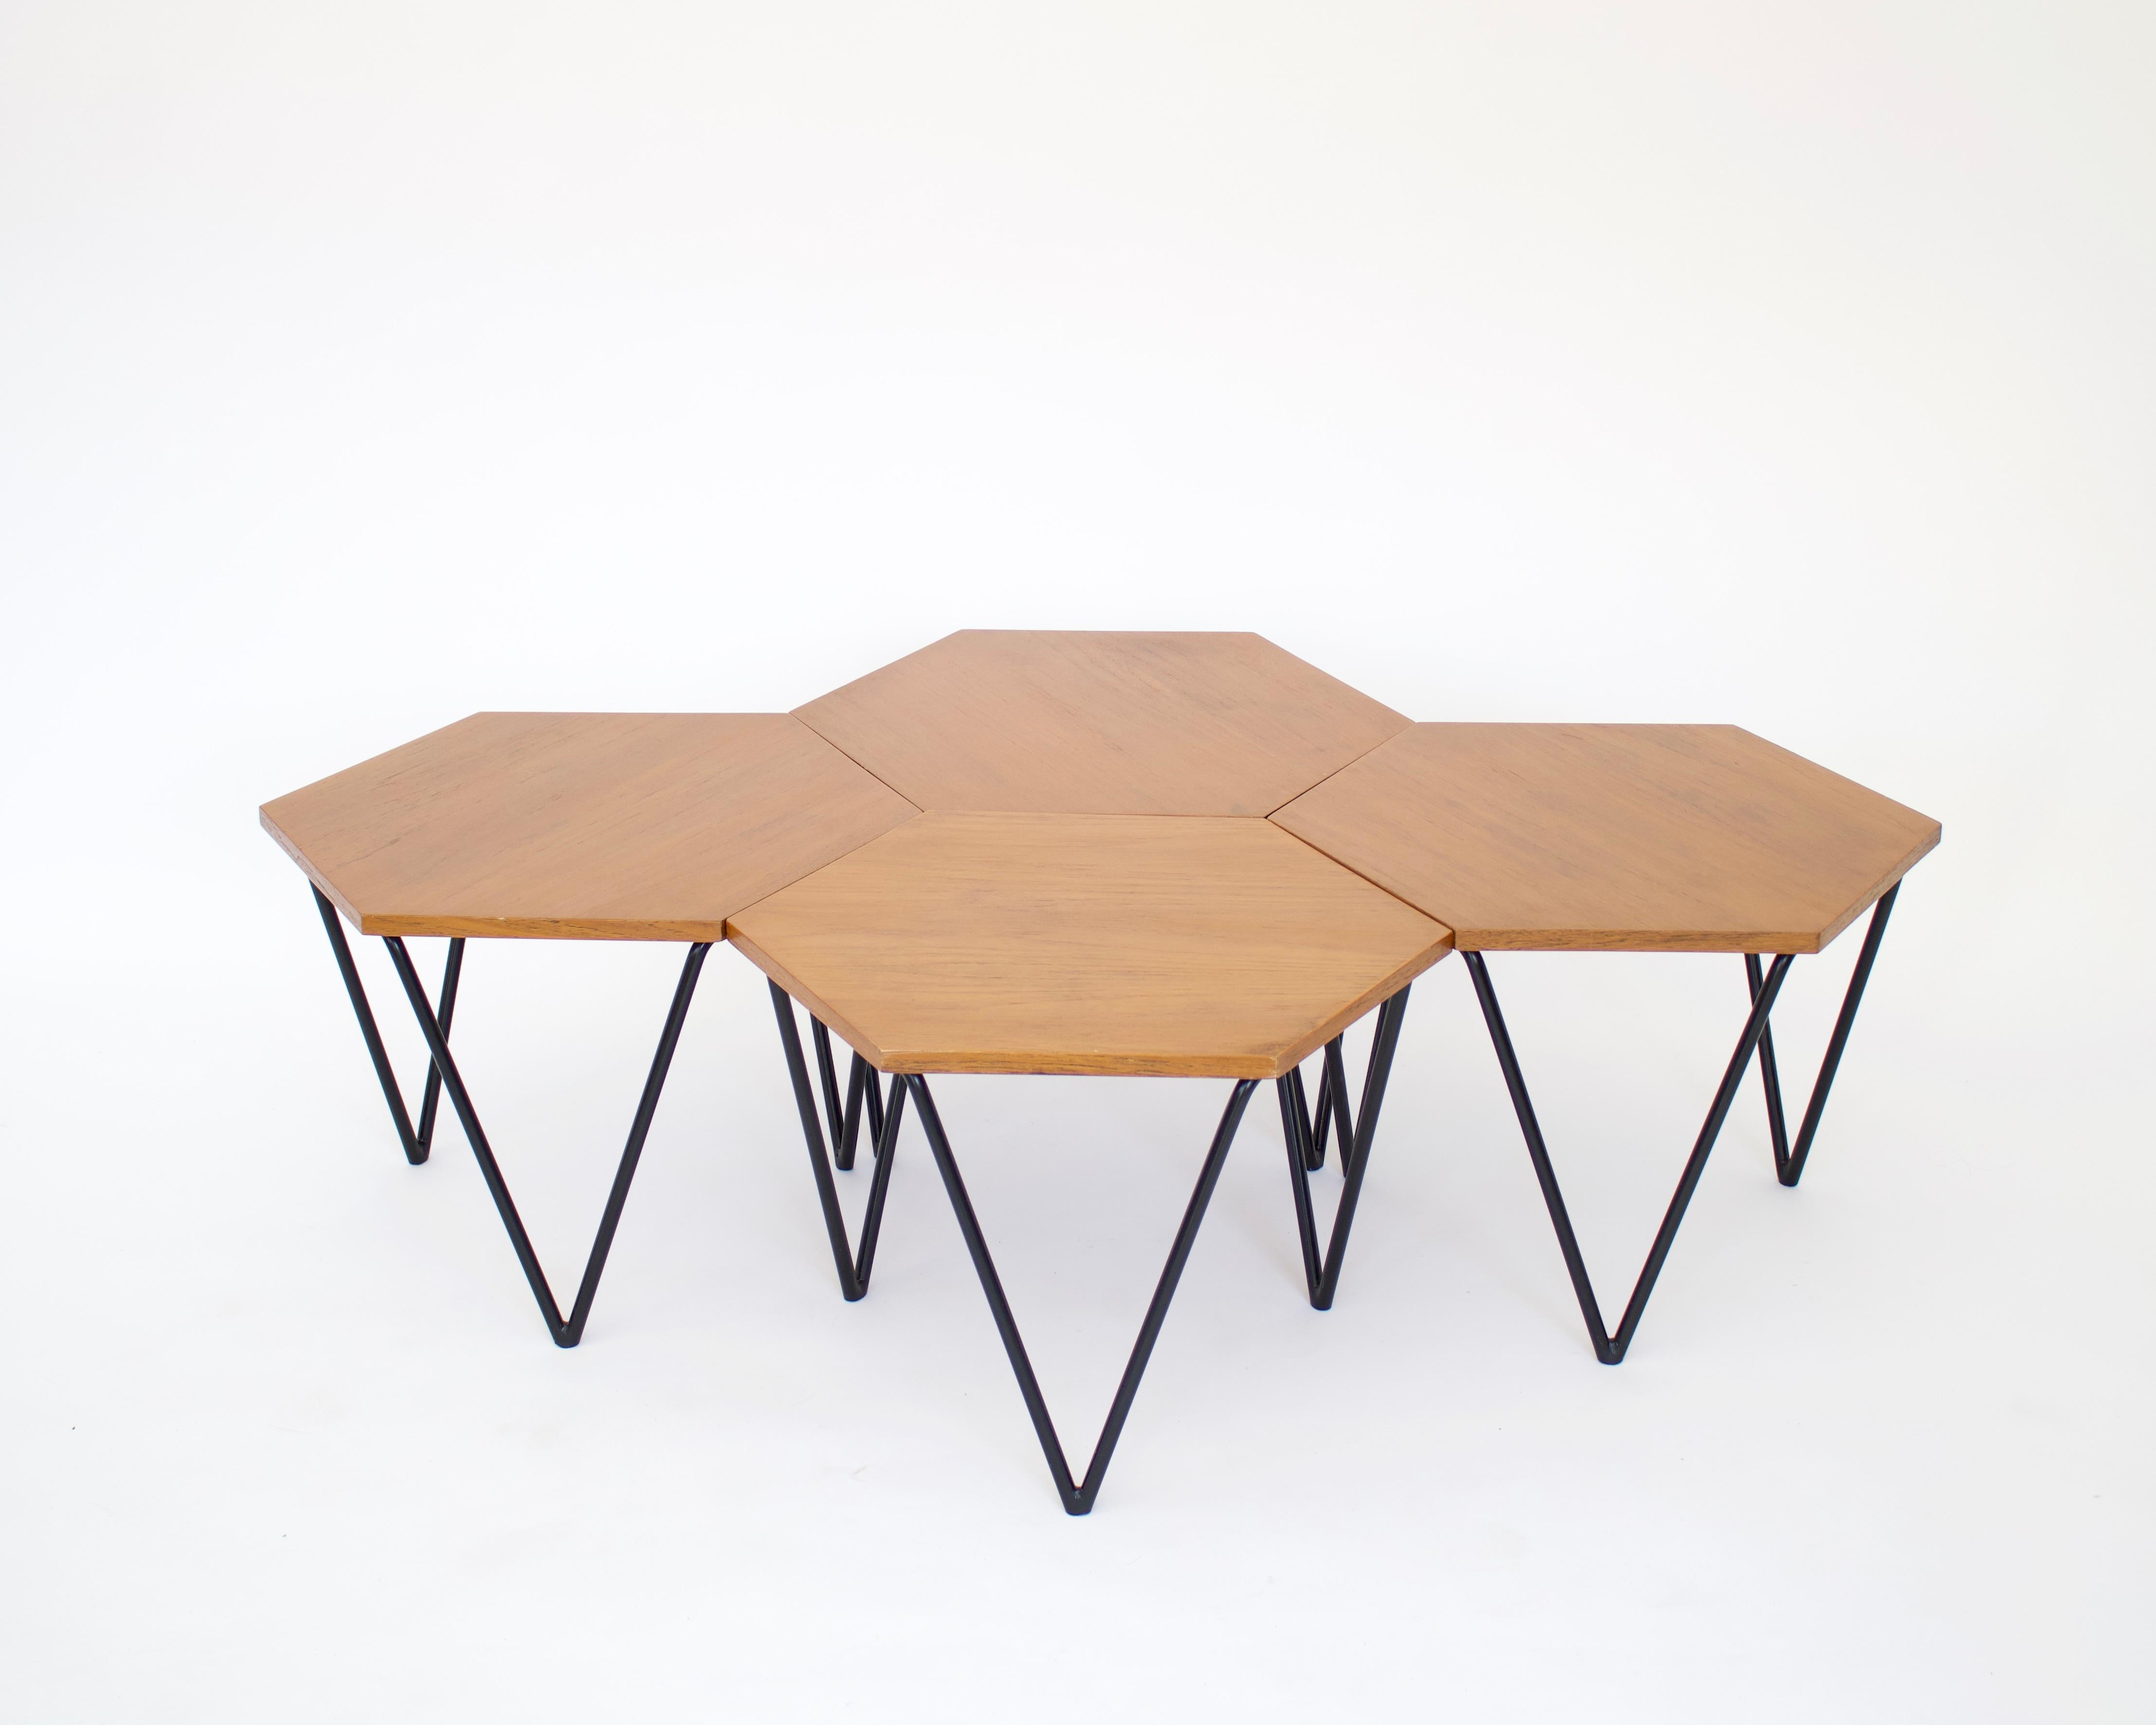 Modular segmented coffee tables designed by Gio Ponti . 7 identical tables either made of wood, black or white laminate. Each had a honeycomb shape and three triangular legs, and can be used as a coffee table or side tables. The metal bases have